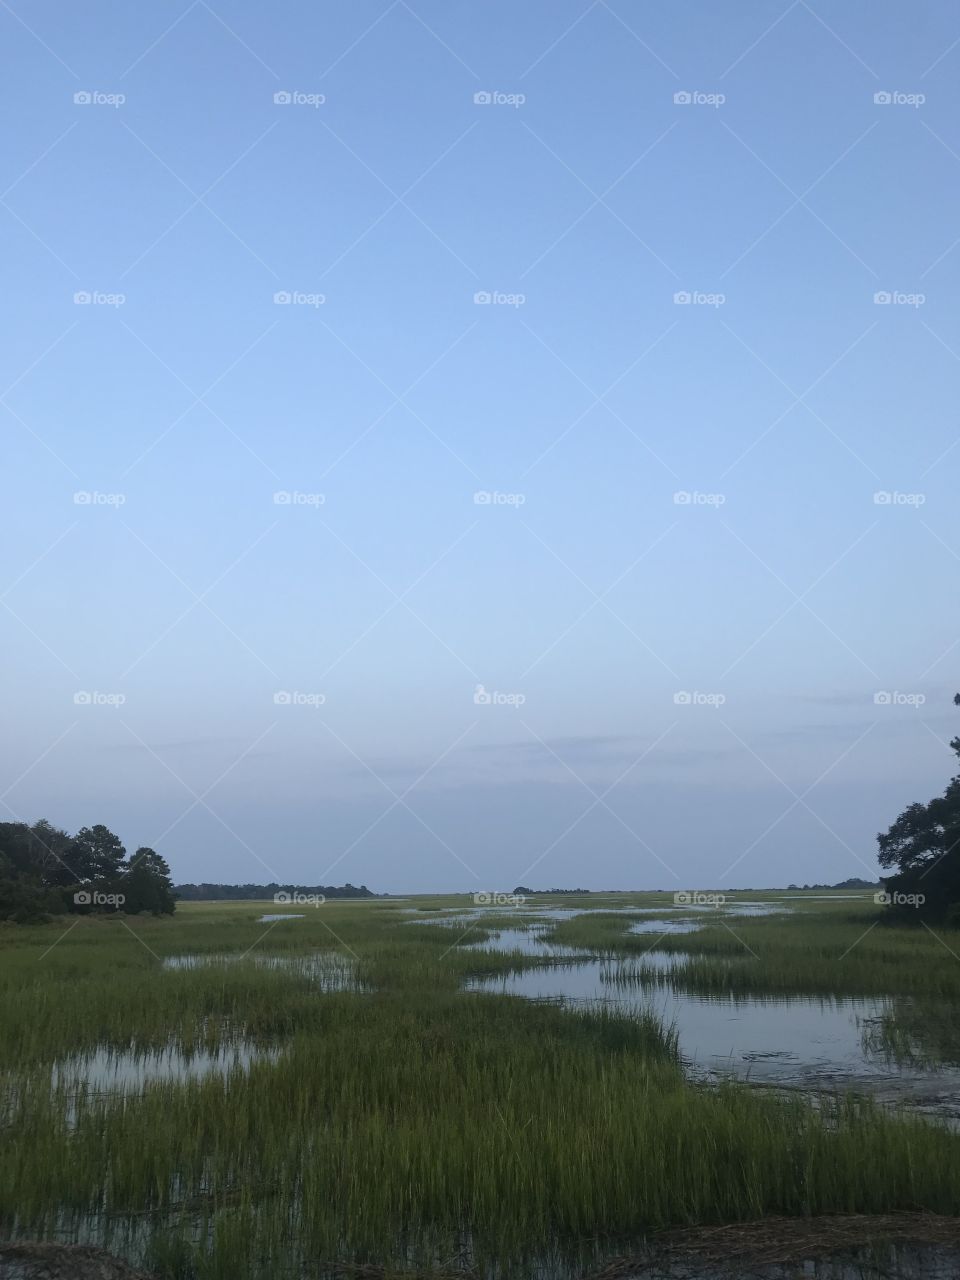 The cool setting of wetlands in Murrels Inlet, South Carolina. A faint circle of the moon can be spotted in the background.